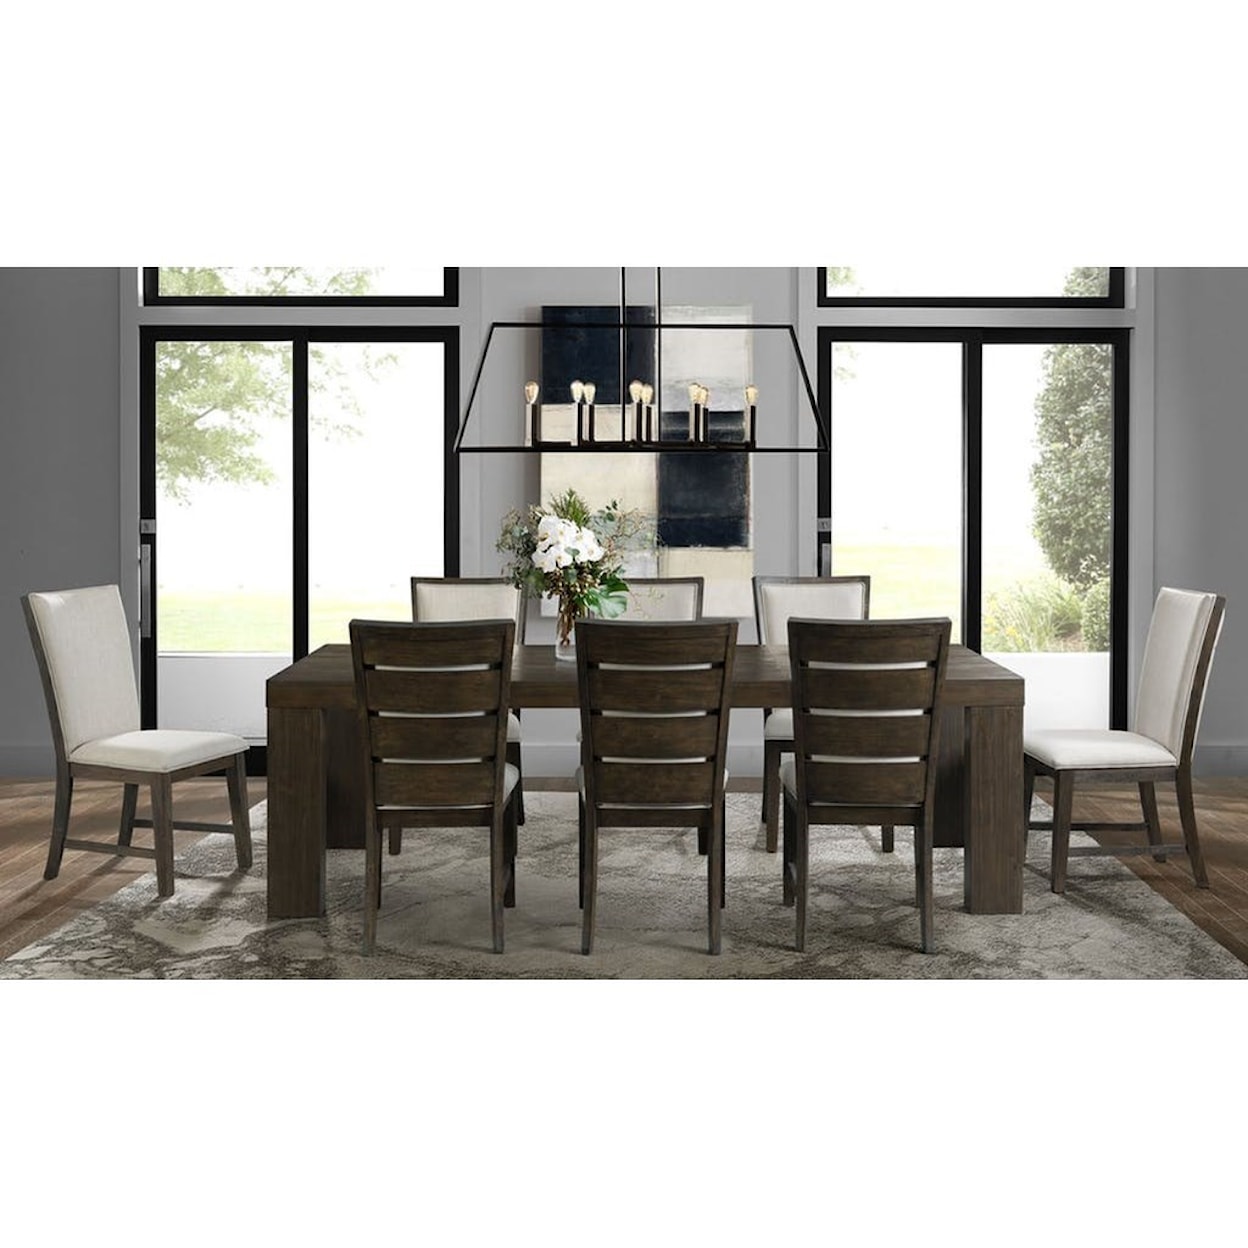 Elements International Grady Dining Table Set with 8 Chairs